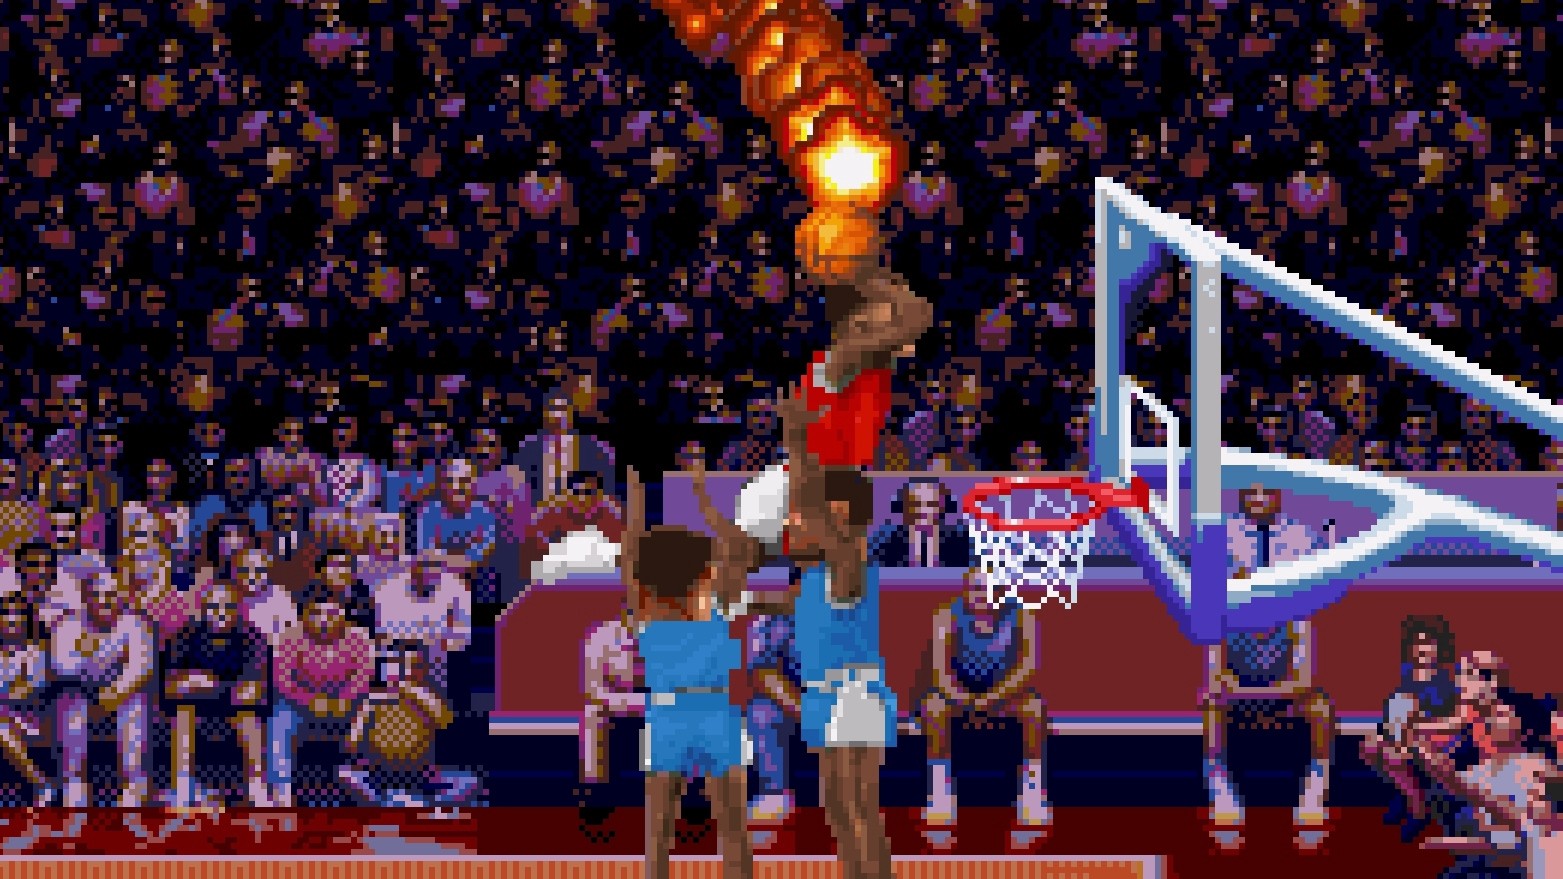 He's on fire!: How a club bouncer starred in the making of billion-dollar  arcade hit NBA Jam